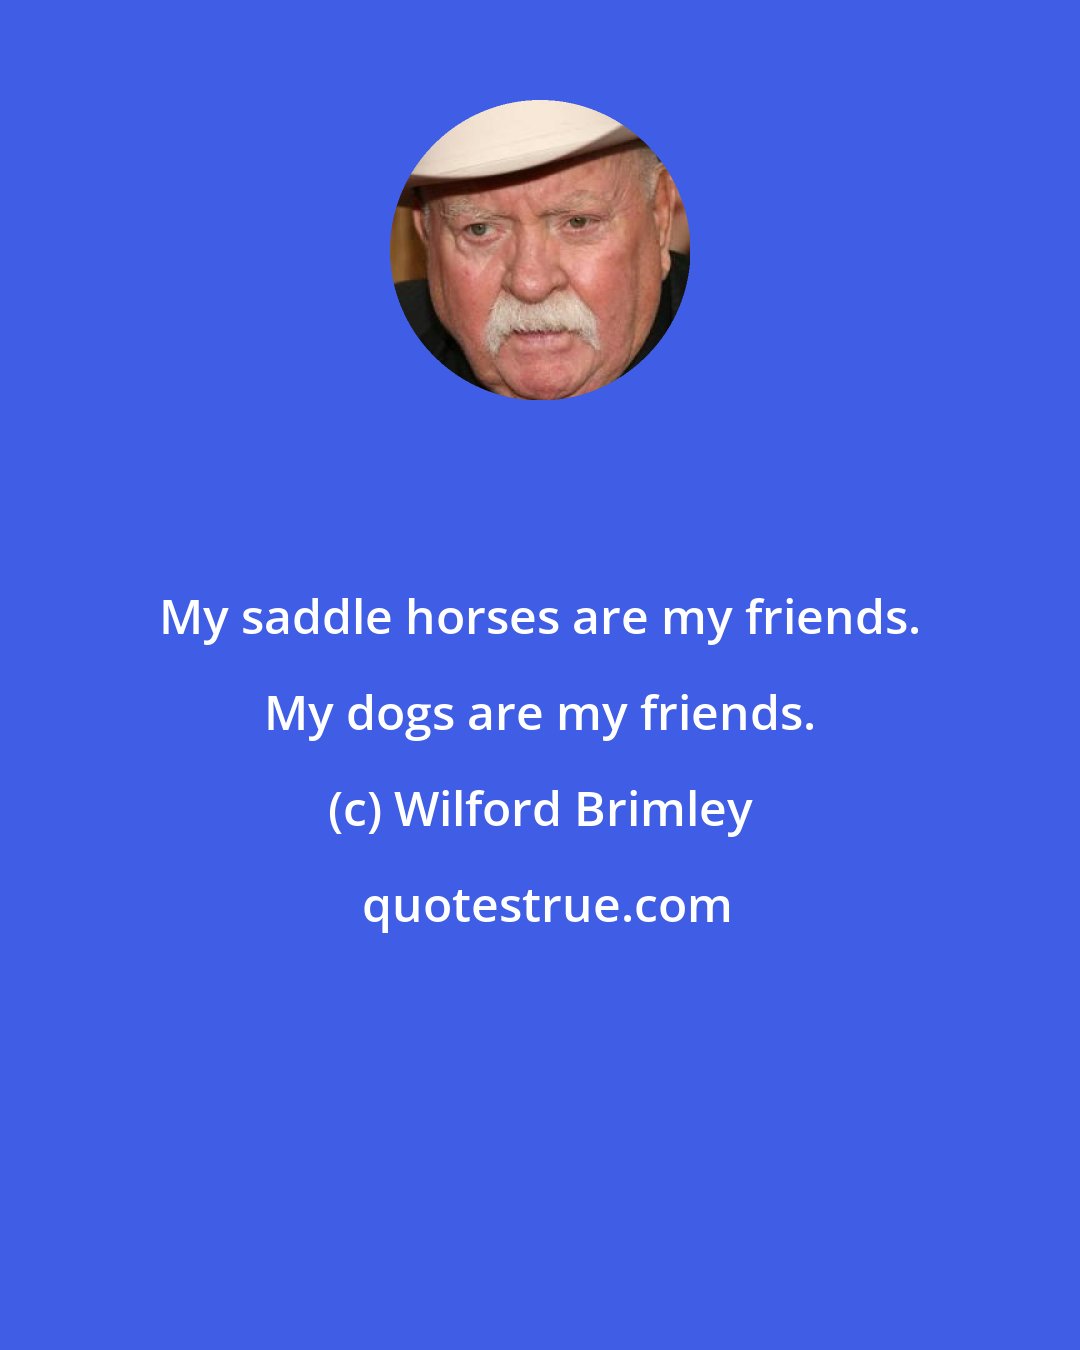 Wilford Brimley: My saddle horses are my friends. My dogs are my friends.